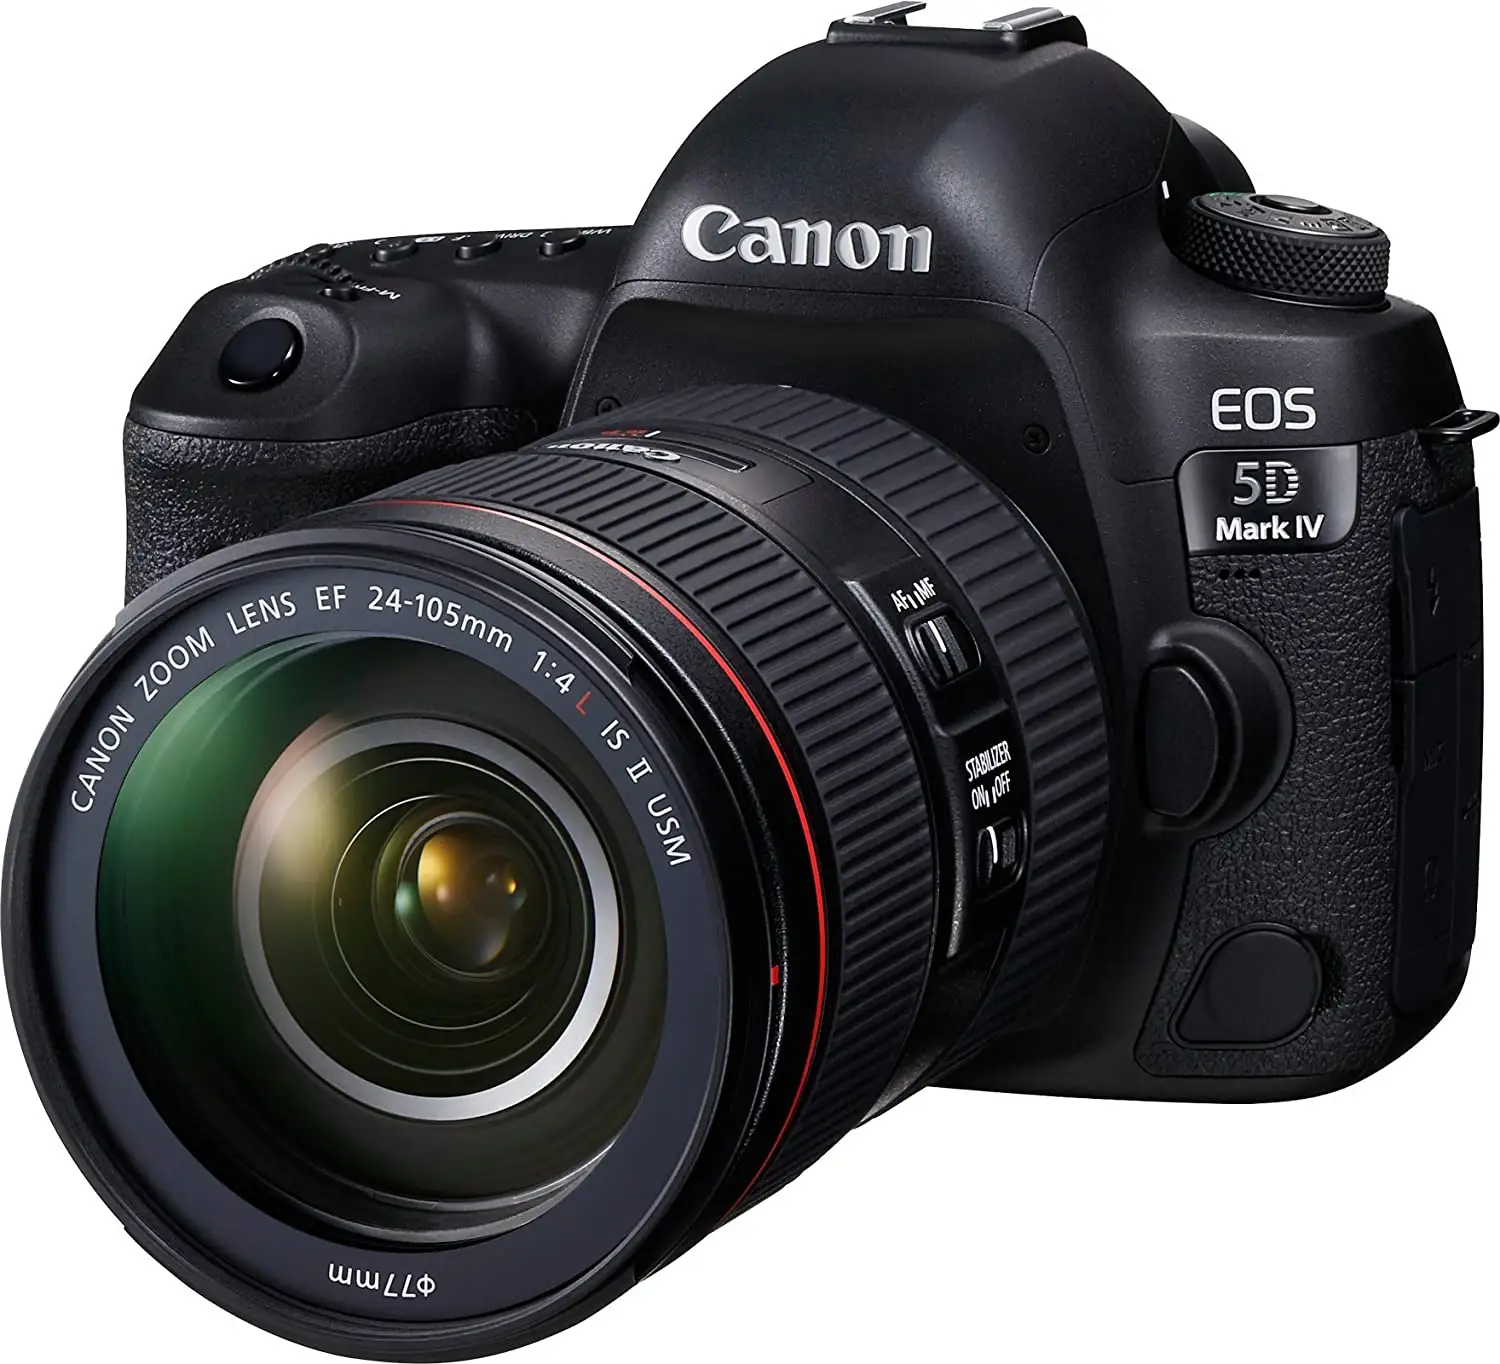 Miglior originale vendita calda nuovo Can-ons E O <span class=keywords><strong>S</strong></span> 5D Mark IV Full Frames <span class=keywords><strong>fotocamera</strong></span> <span class=keywords><strong>digitale</strong></span> SLR con EF 24-105mm F/4L IS II U <span class=keywords><strong>S</strong></span> M Lens Kit